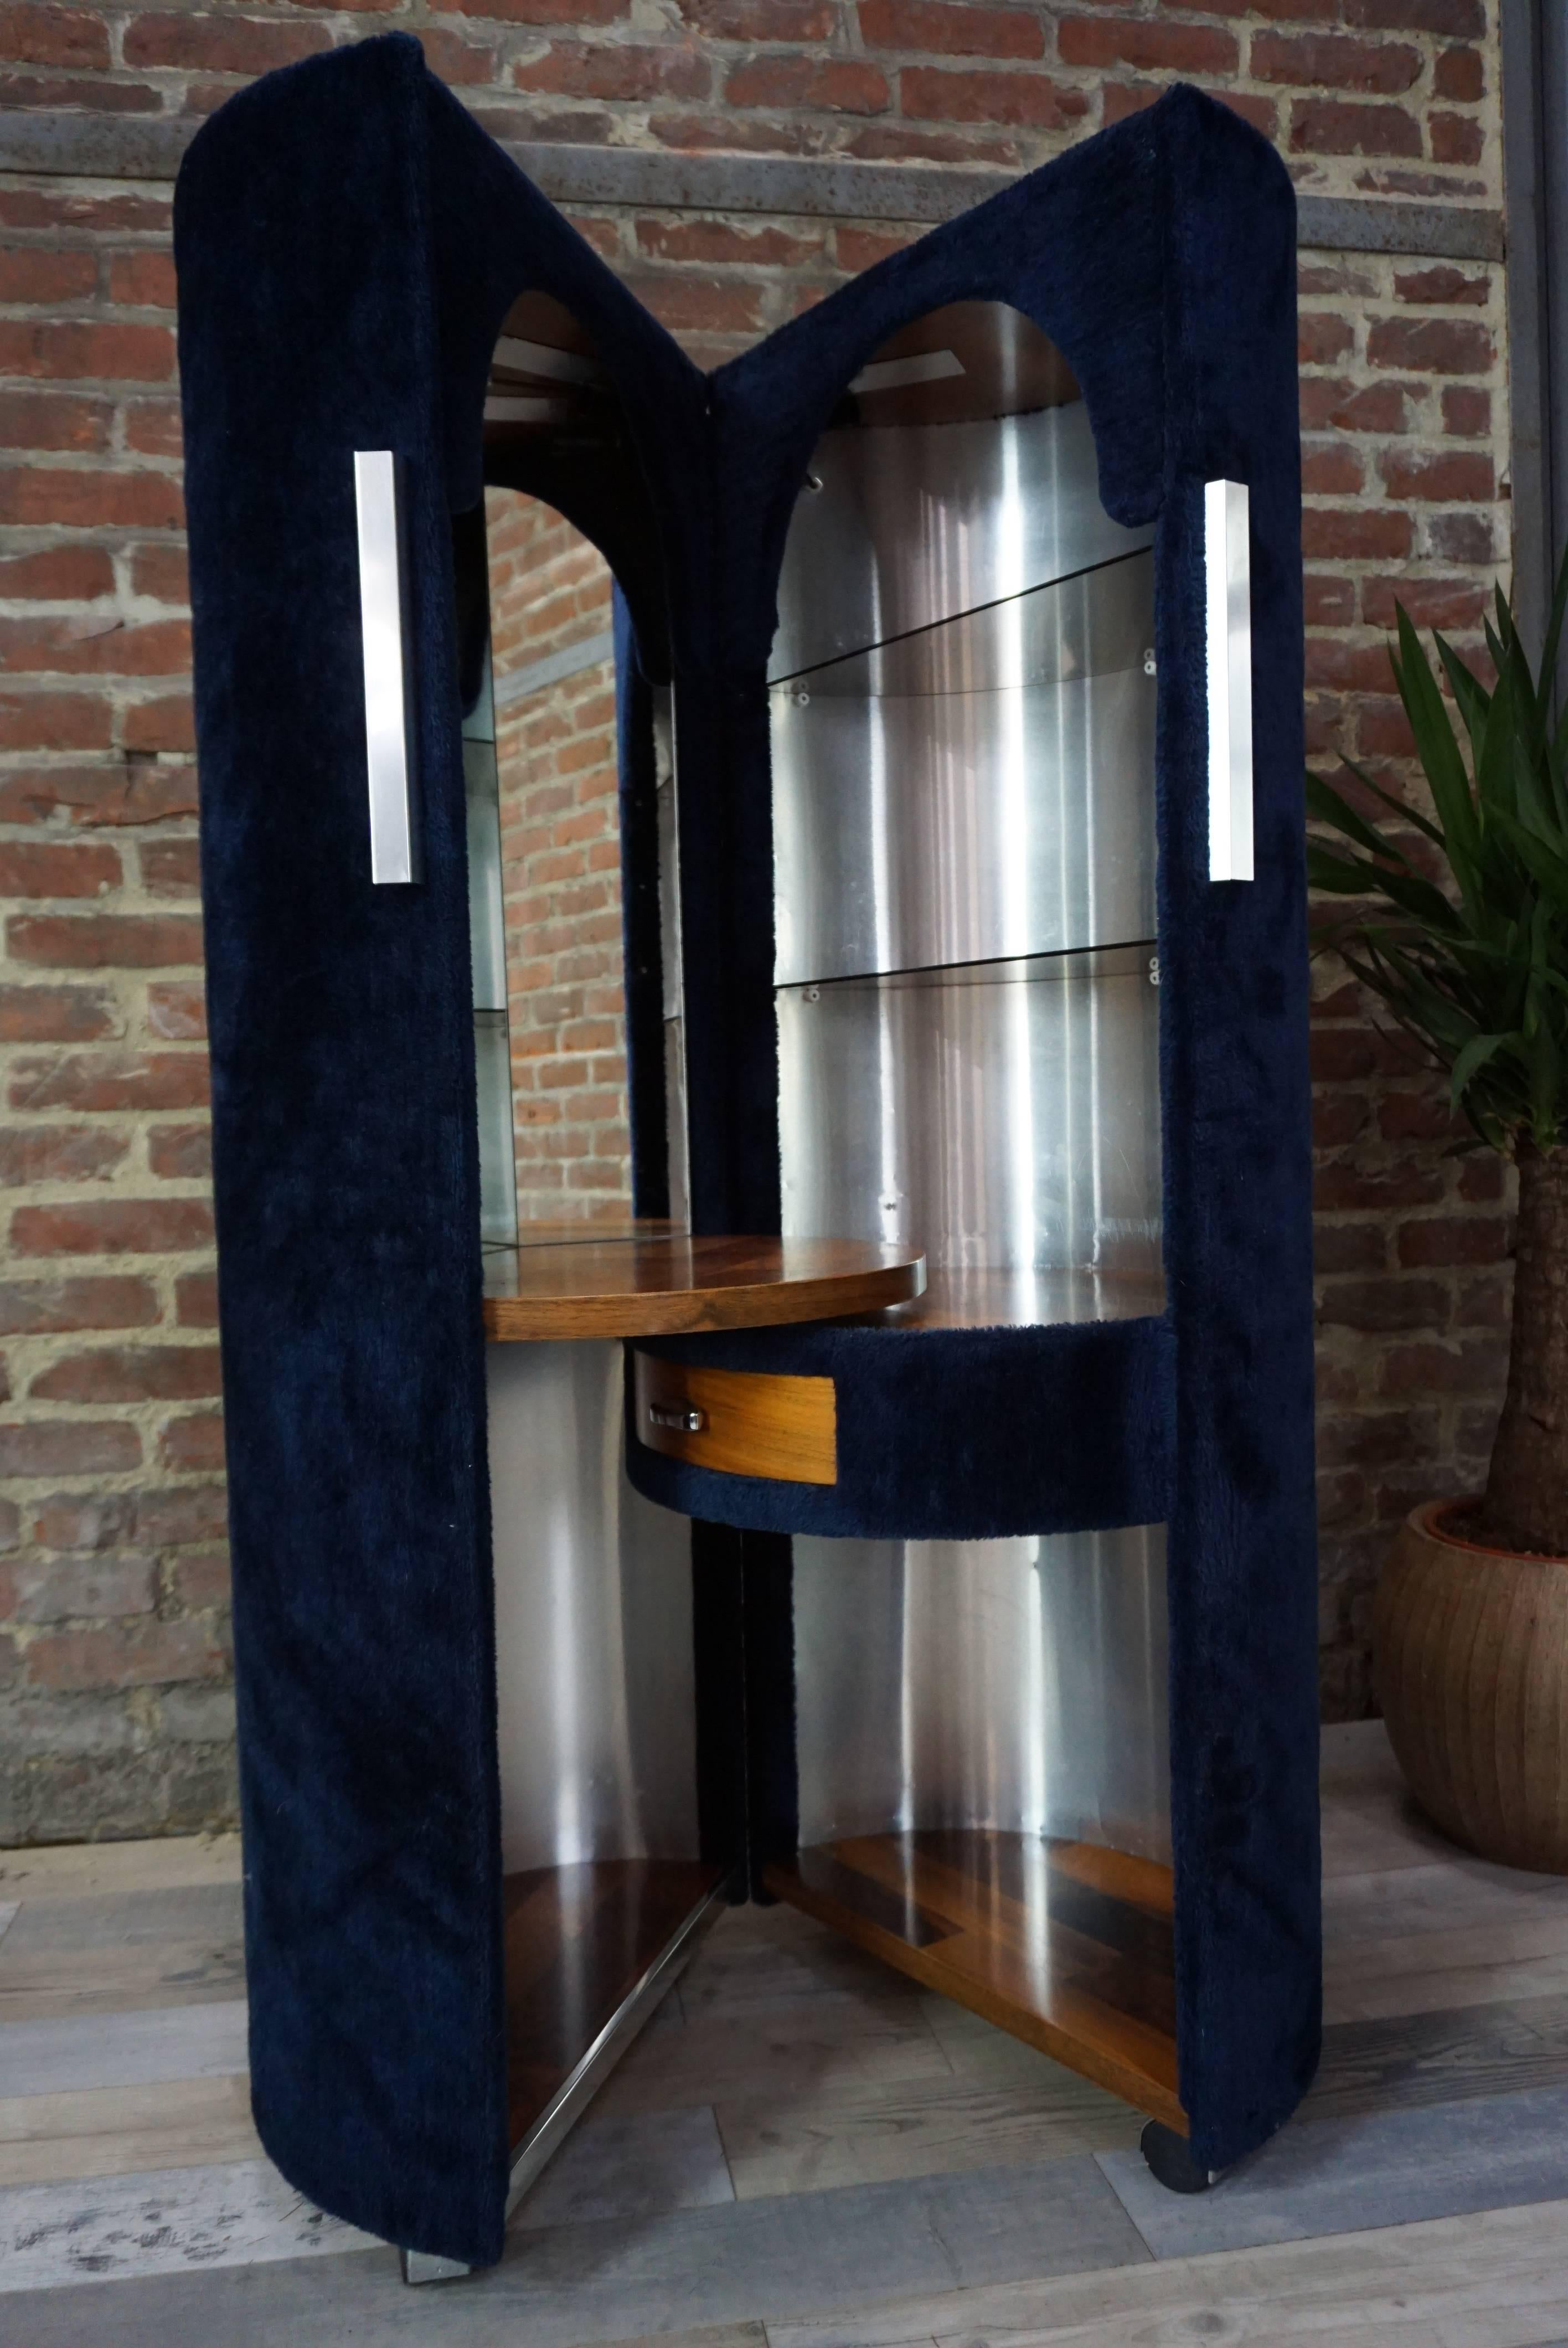 Unmistakable cylindrical vanity dressed in blue fur night, design Space Age 1970 of the famous home high-end Poltrona Frau.